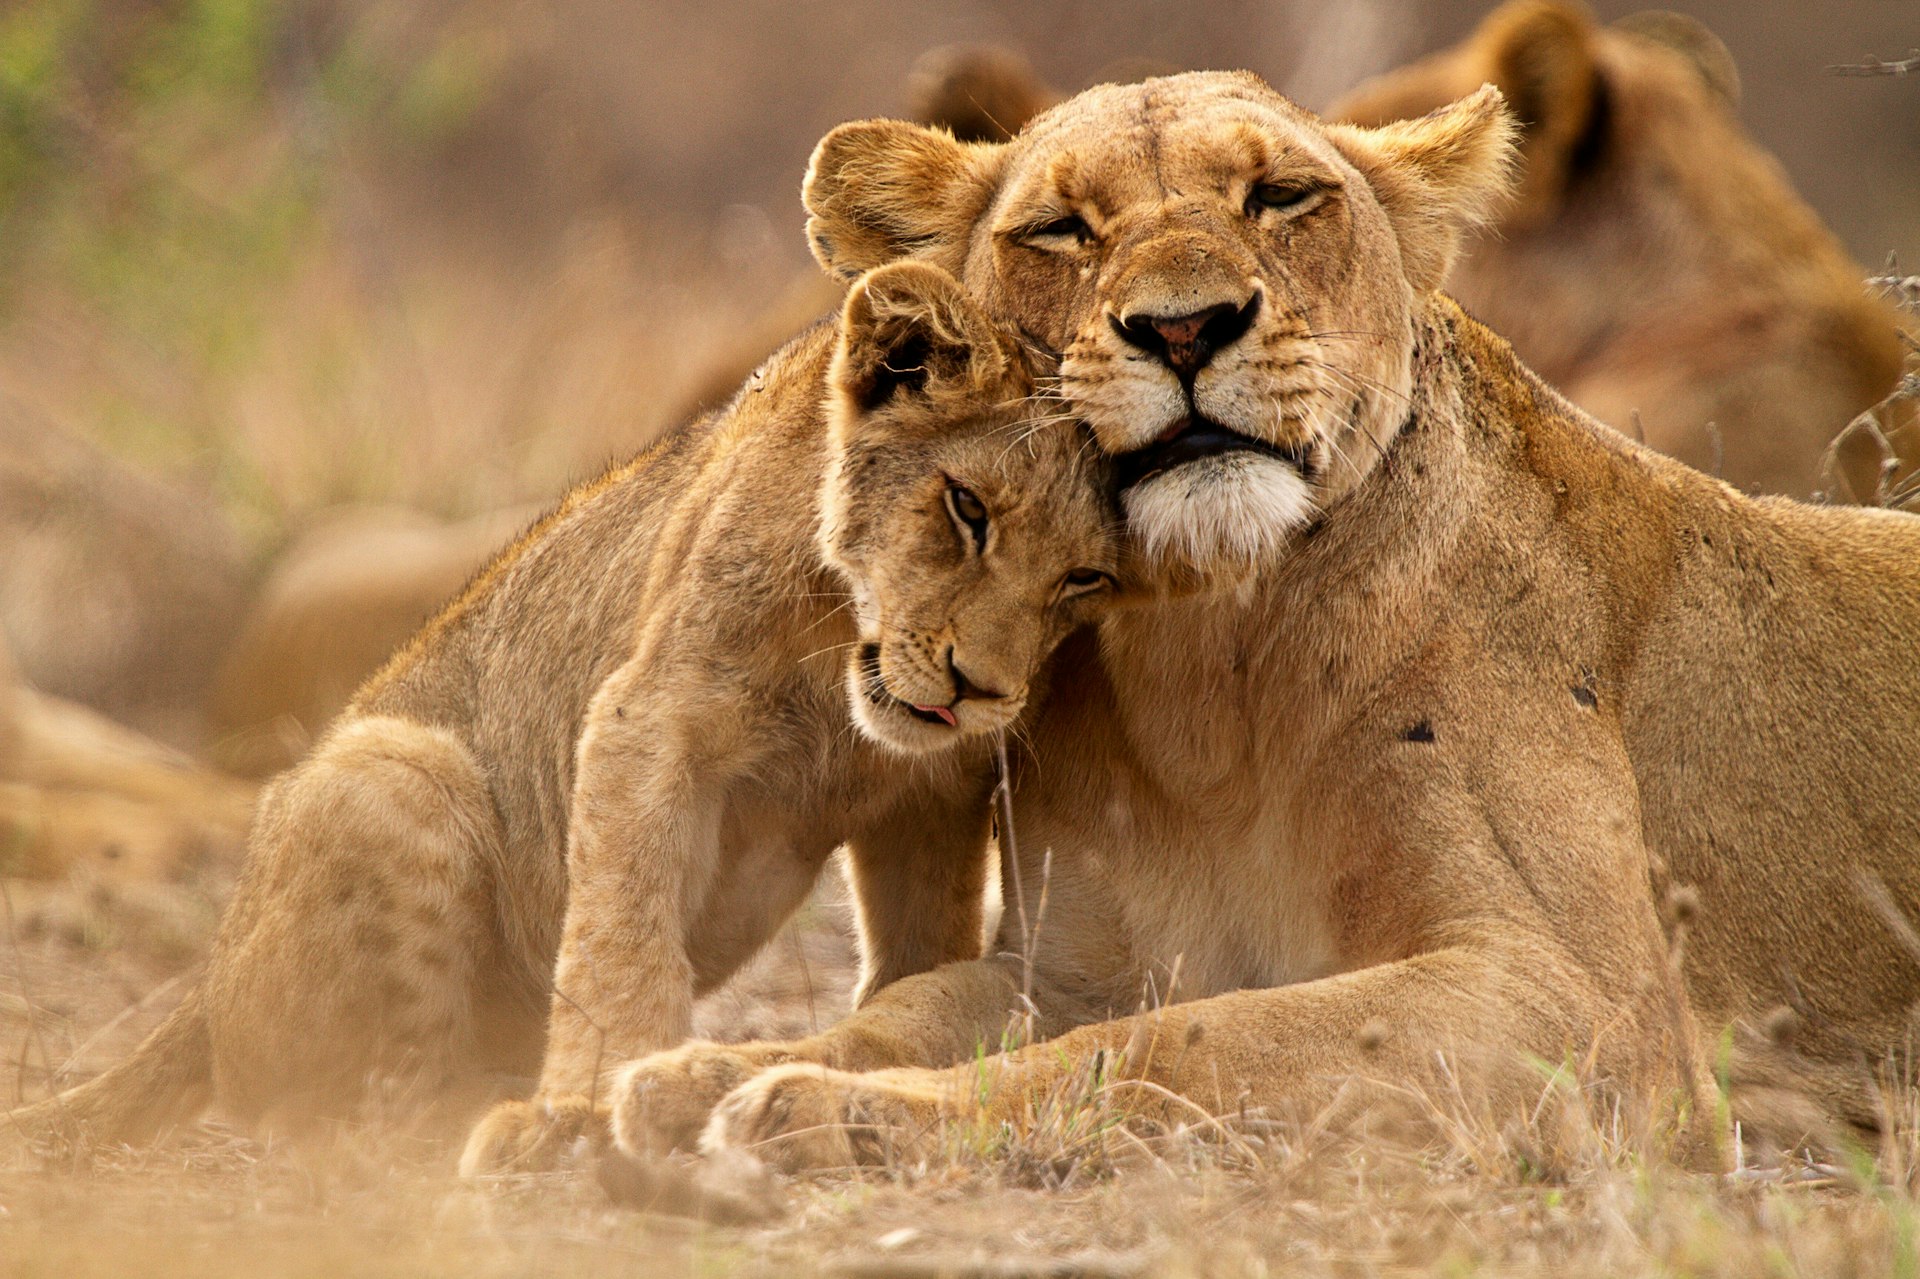 A lion cub sits and pushes its head against the chin of a lioness who is laying down with her head raised (her eyes are closed)